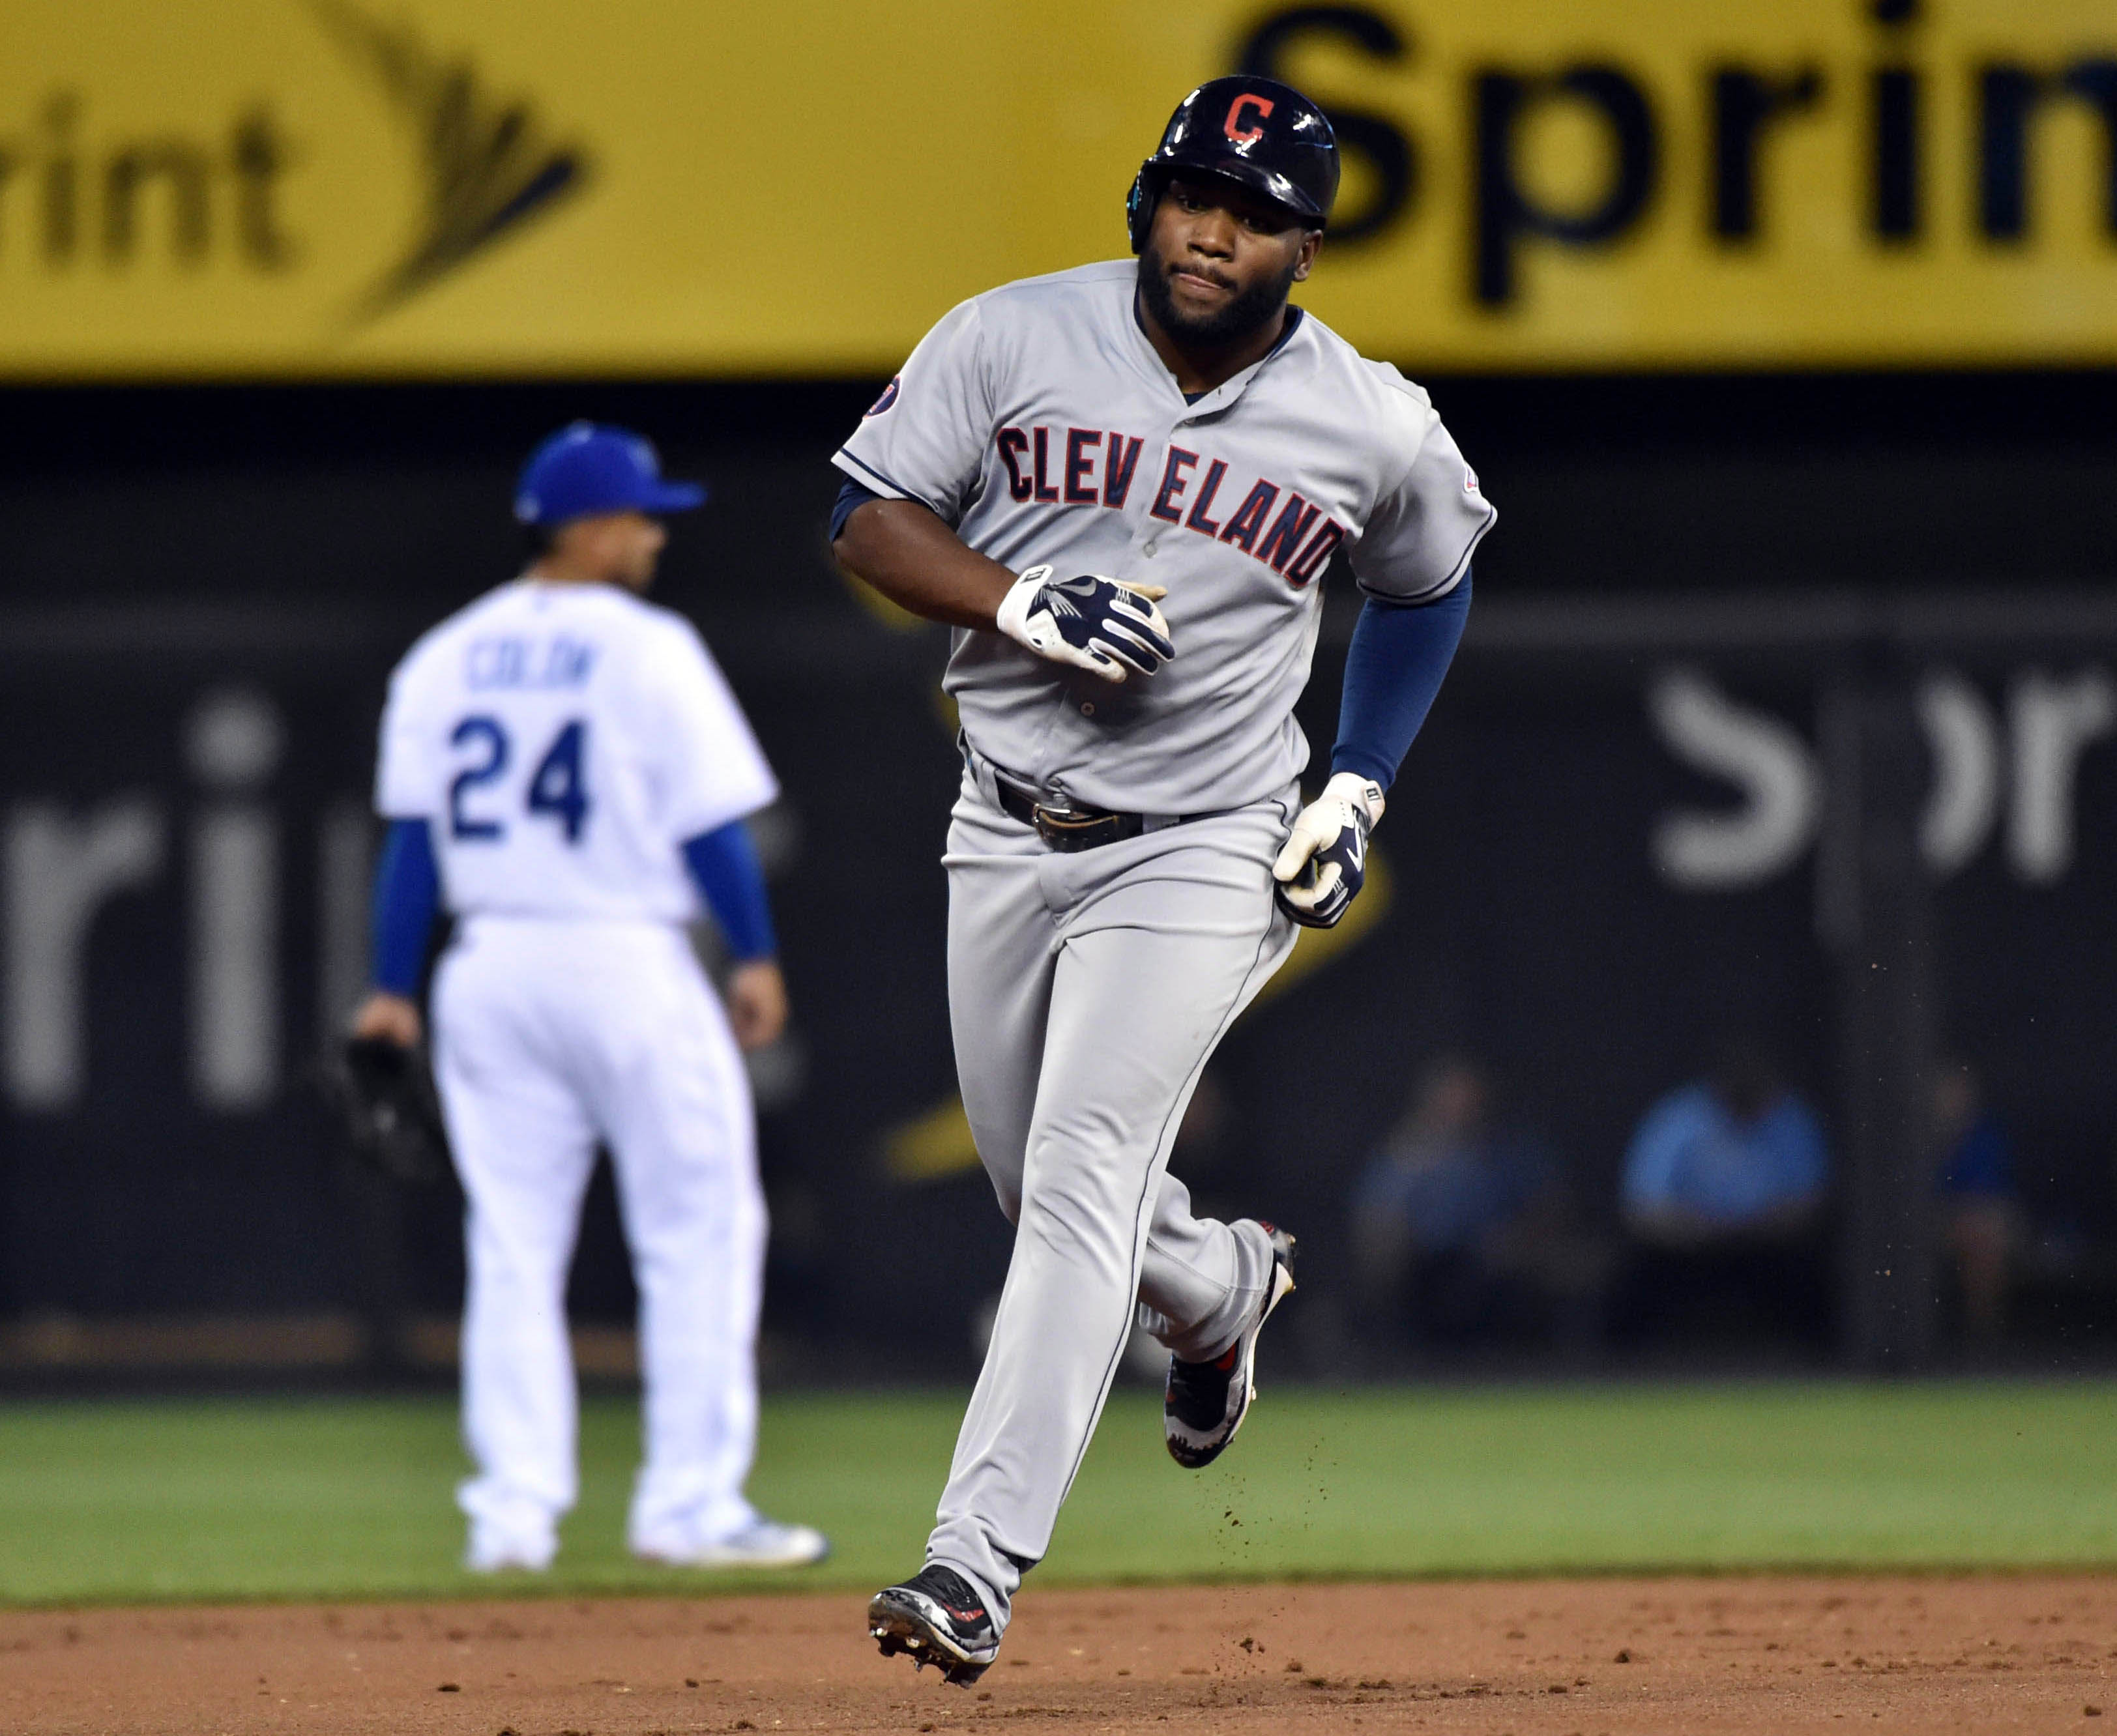 Cleveland Indians outfielder Abraham Almonte suspended by MLB